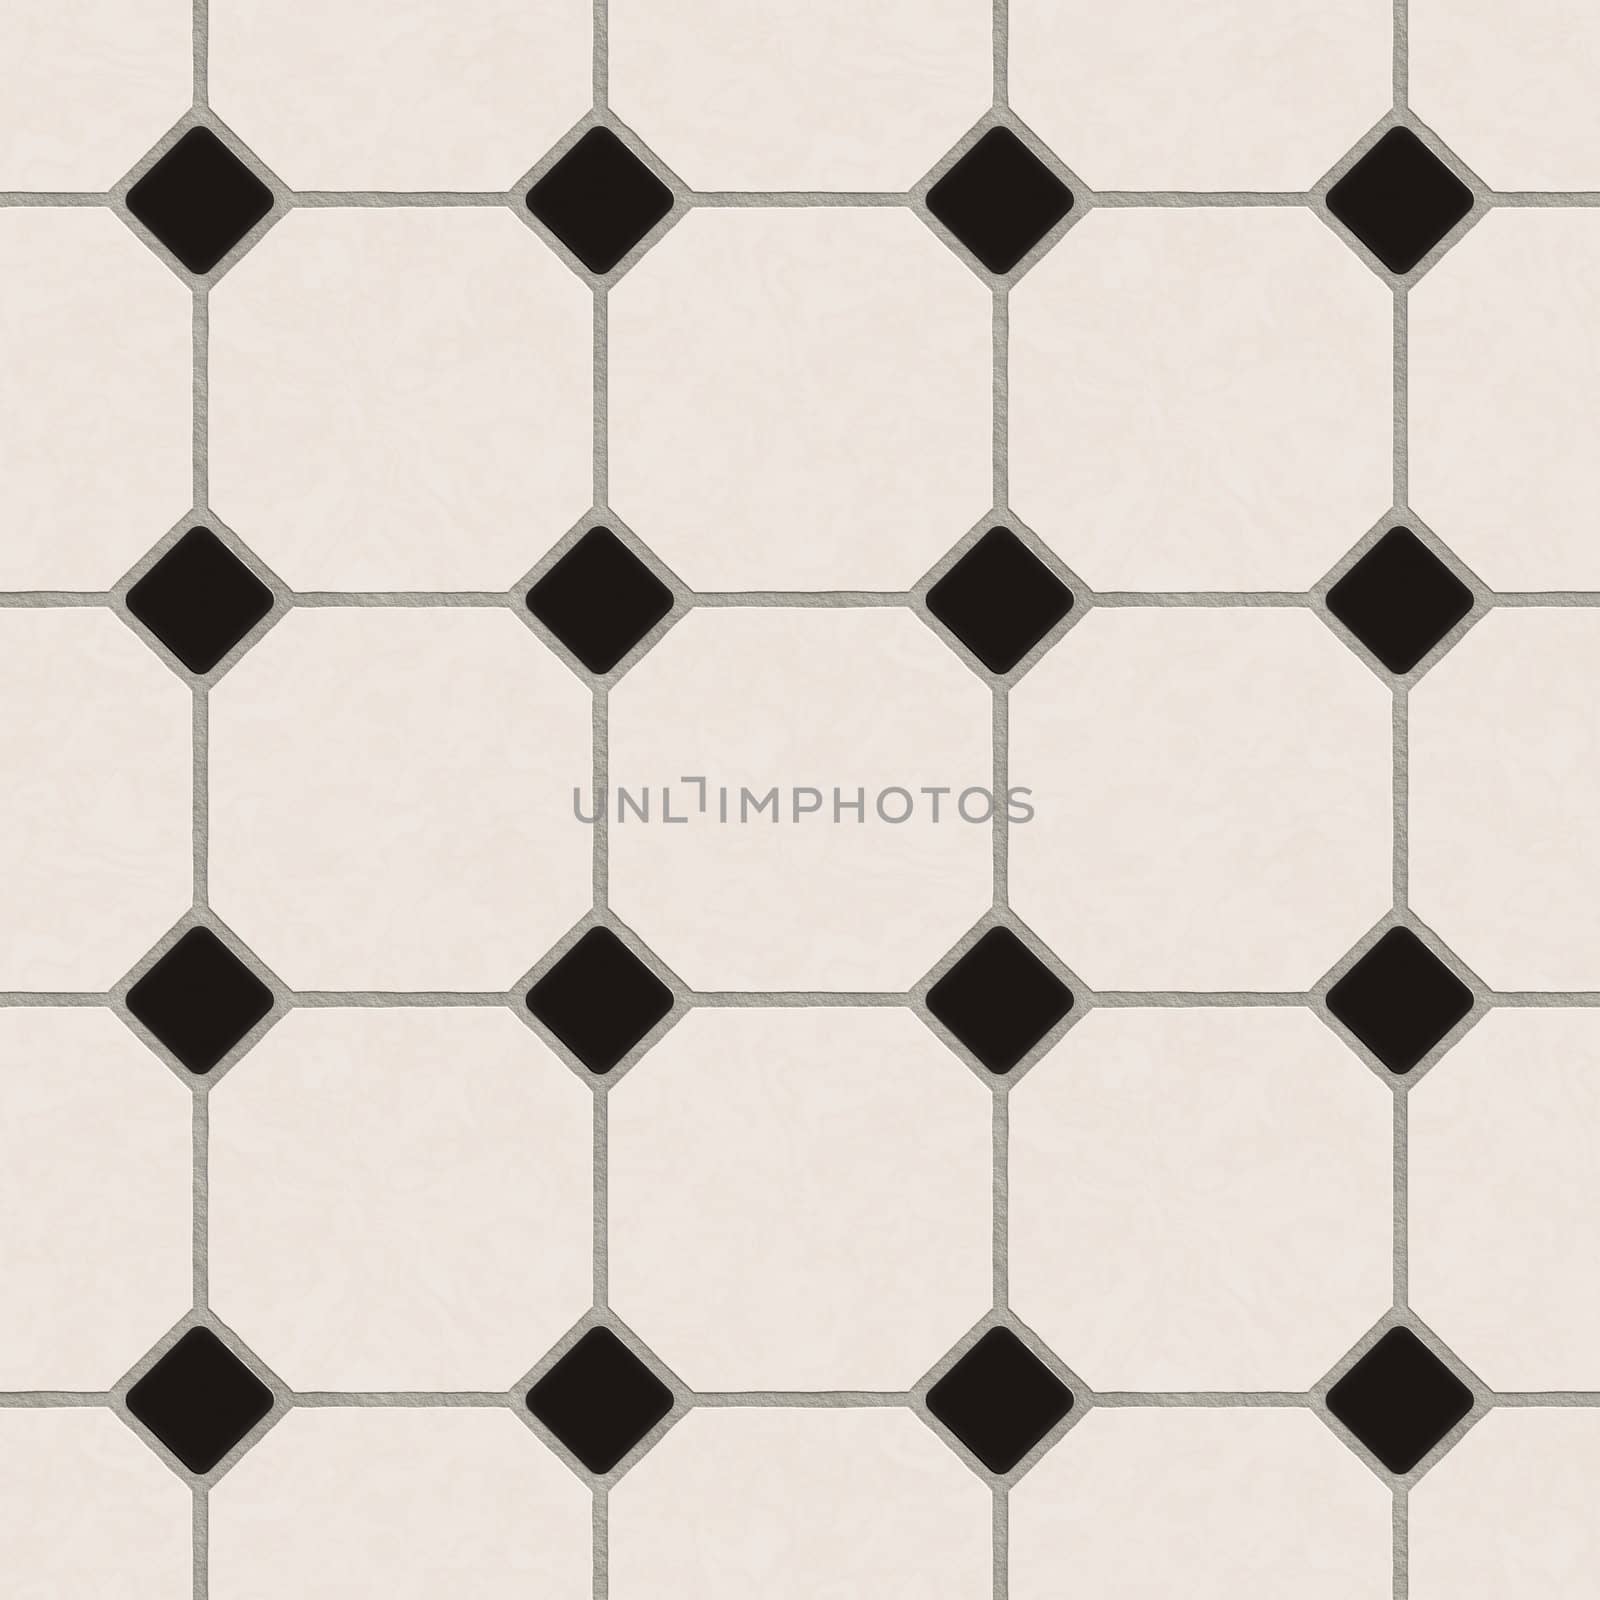 Realistic Rendering of Peach and Black Glazed Classical Tiles